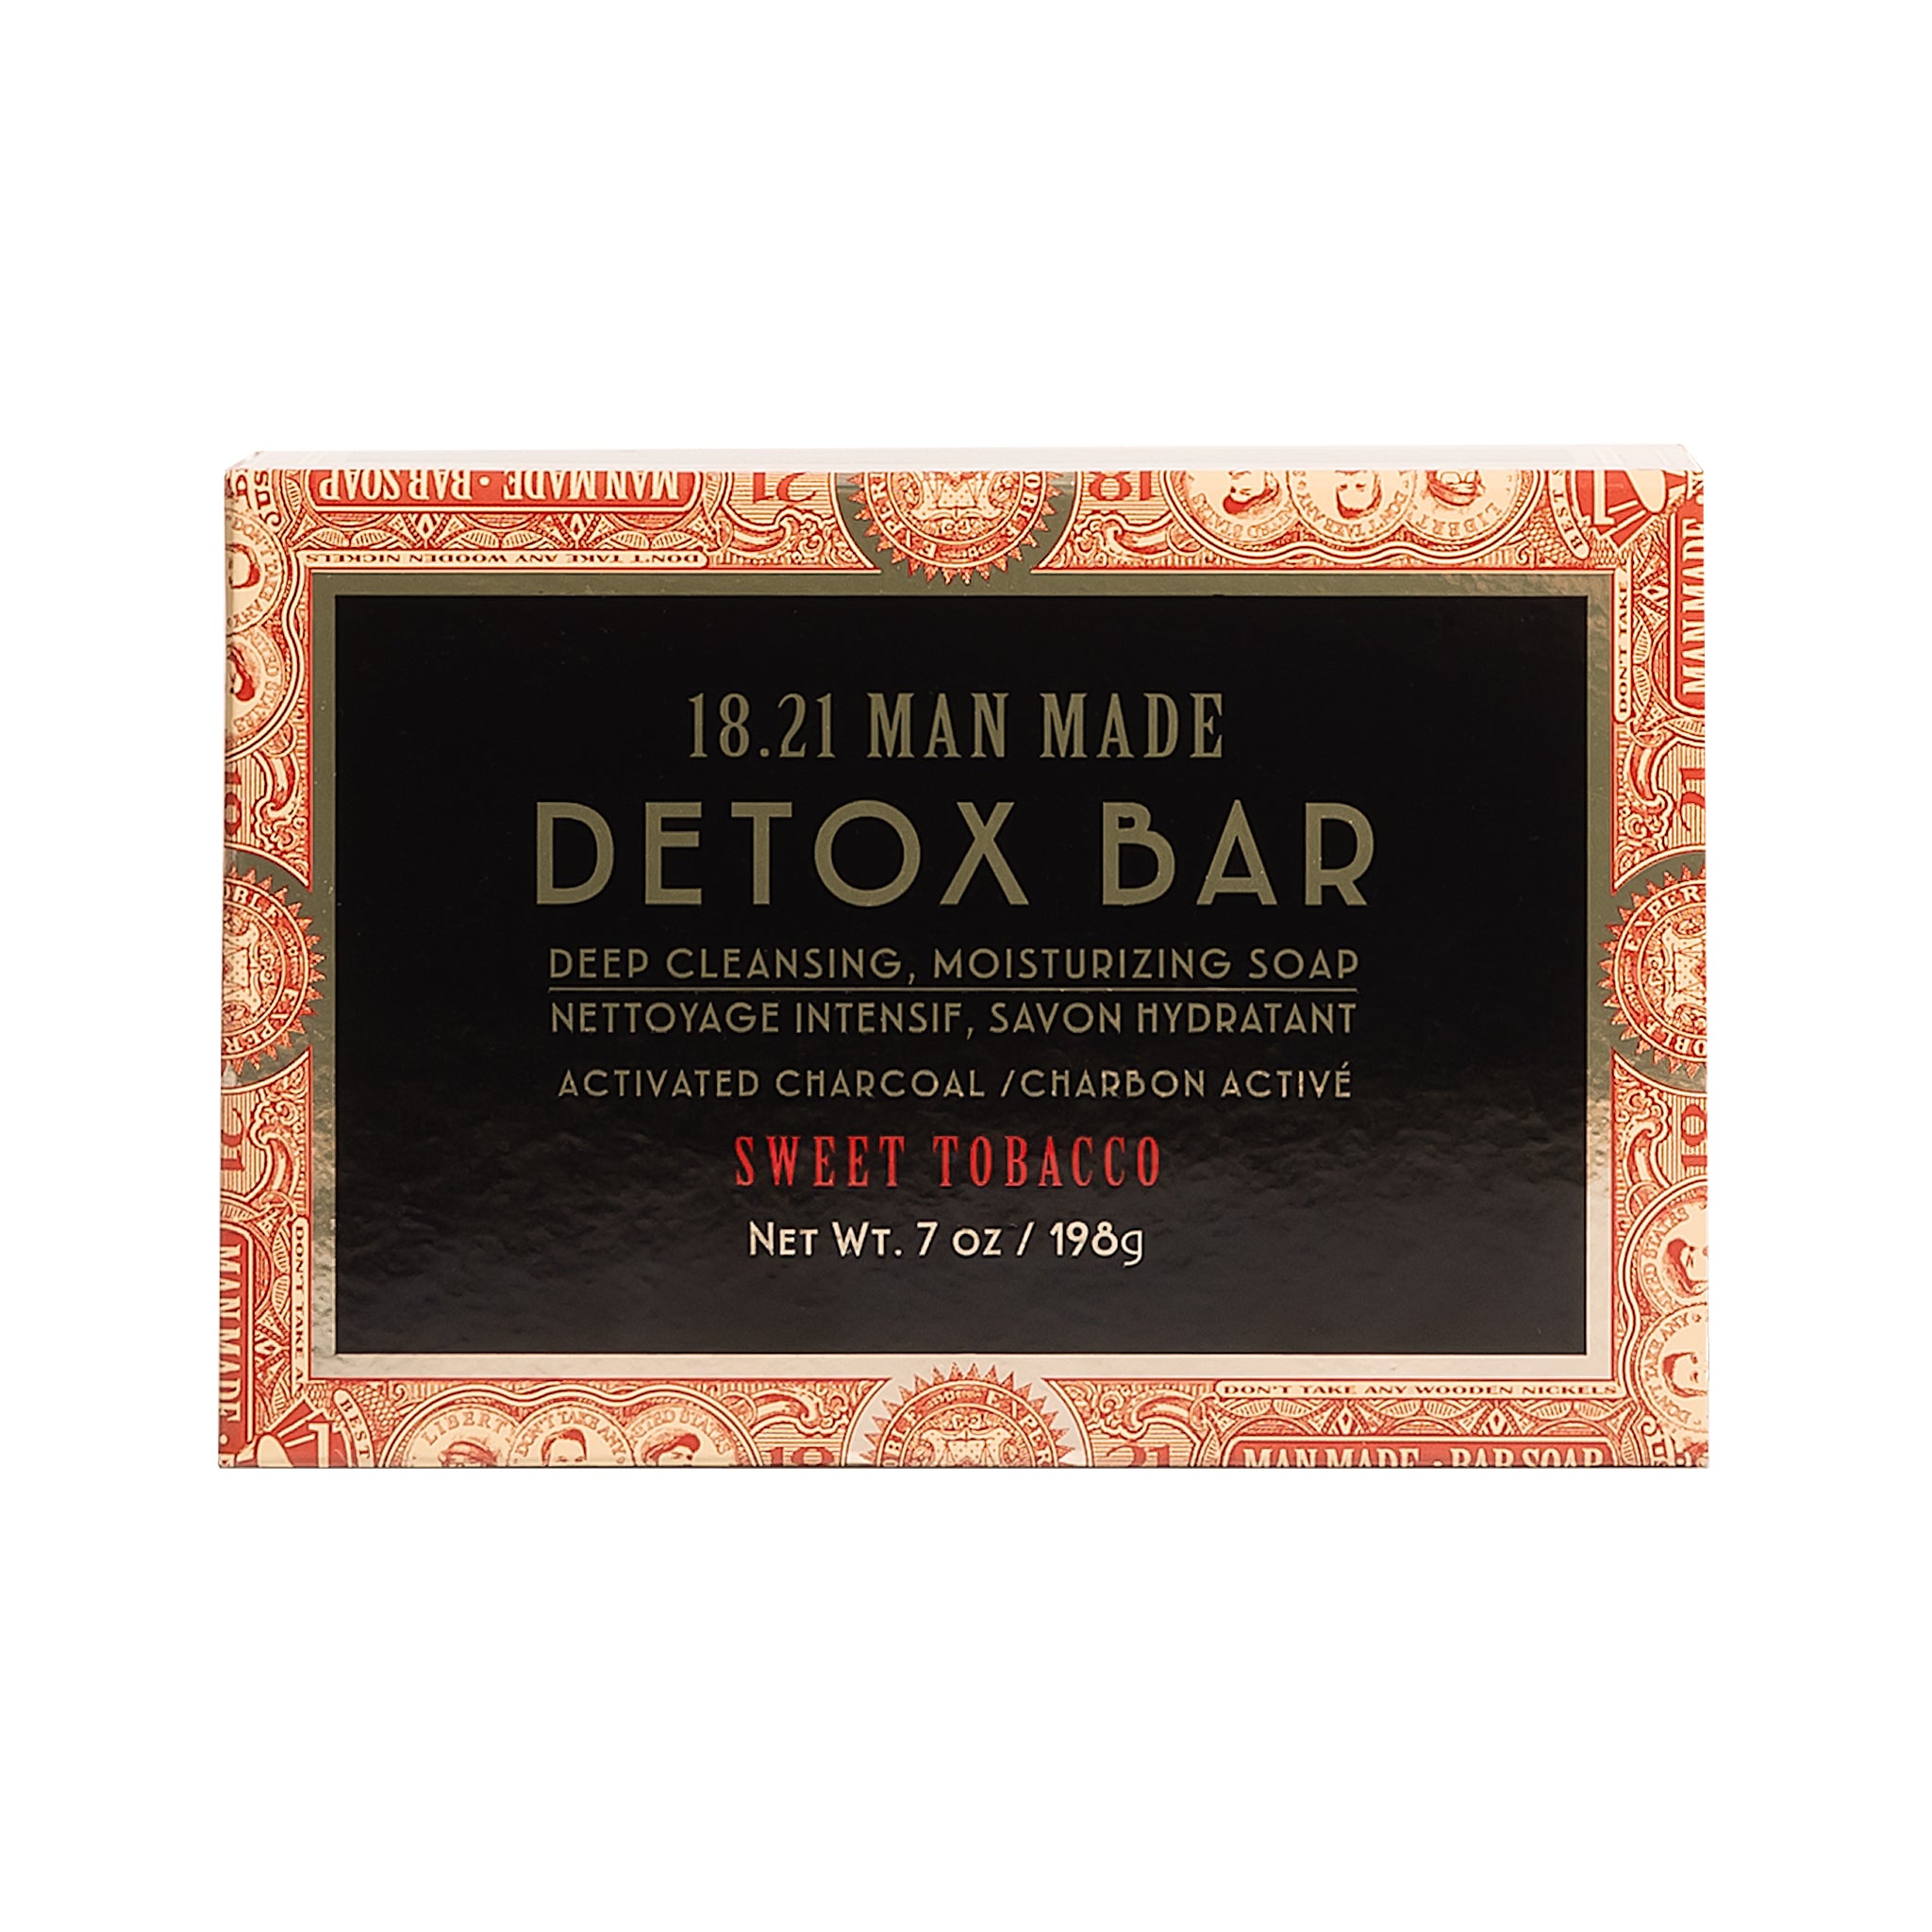 18.21 Man Made Detox Bar in Sweet Tobacco Scent